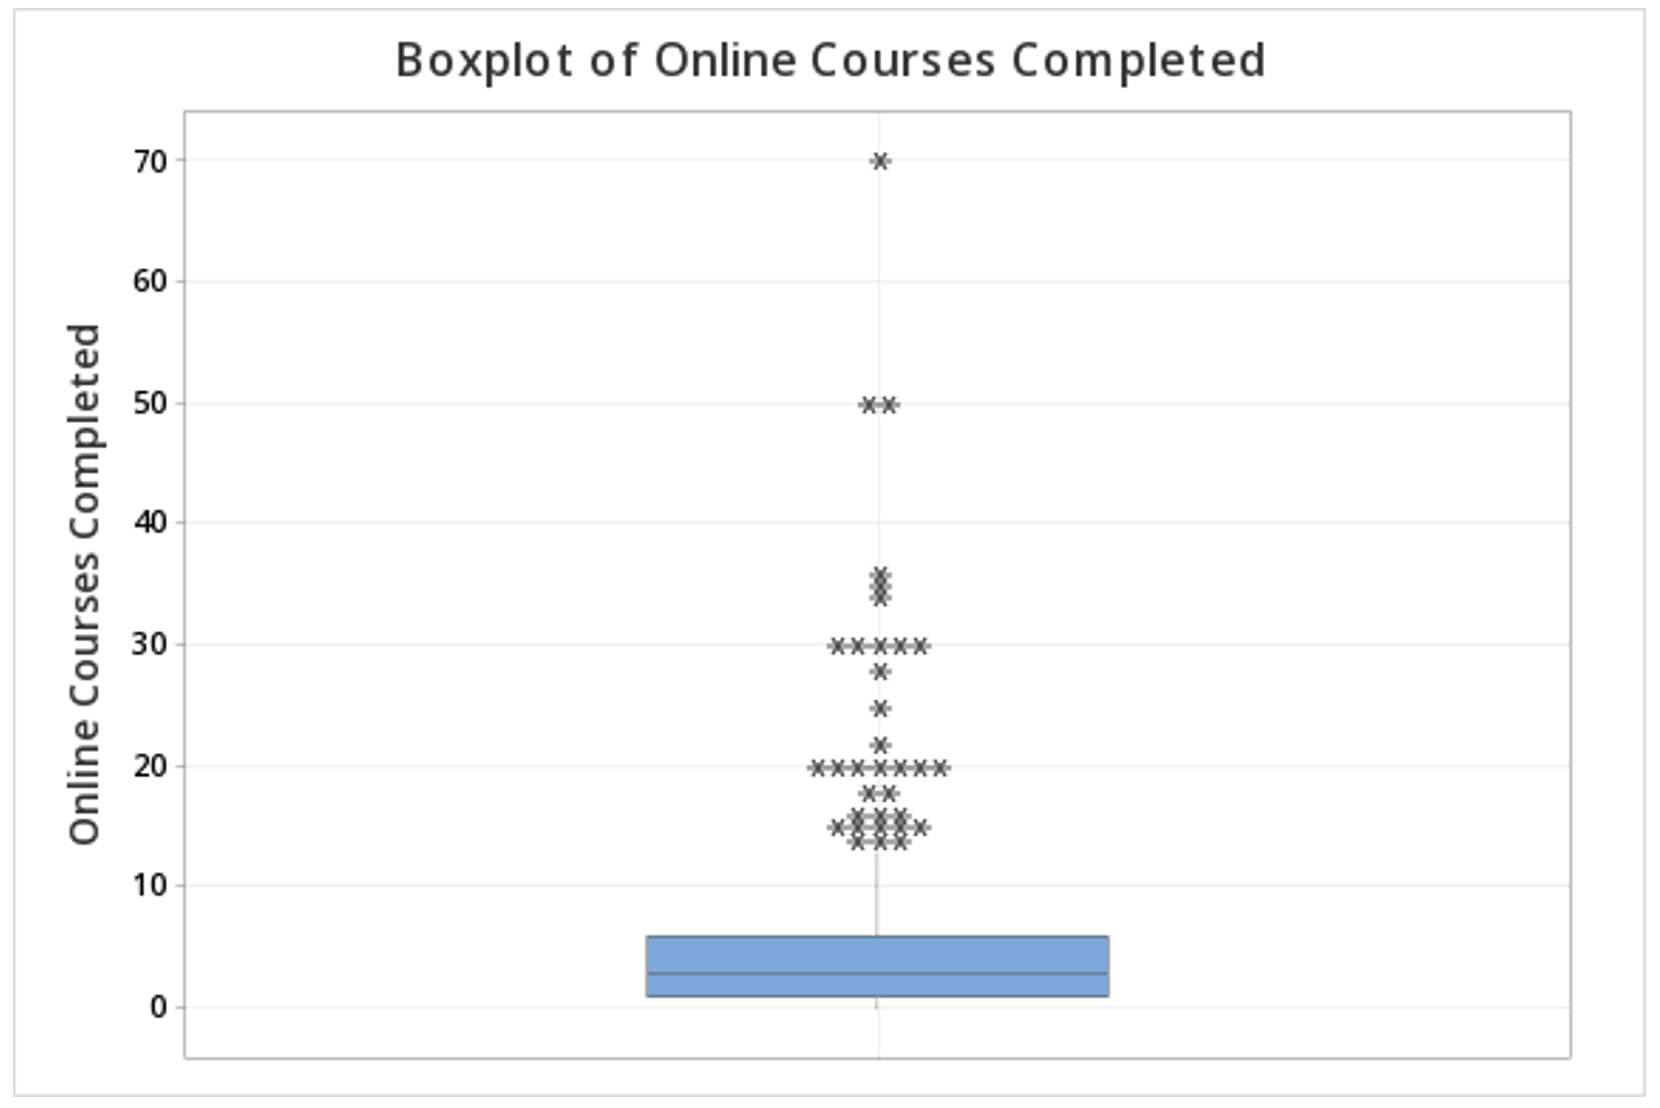 Boxplot of online courses completed